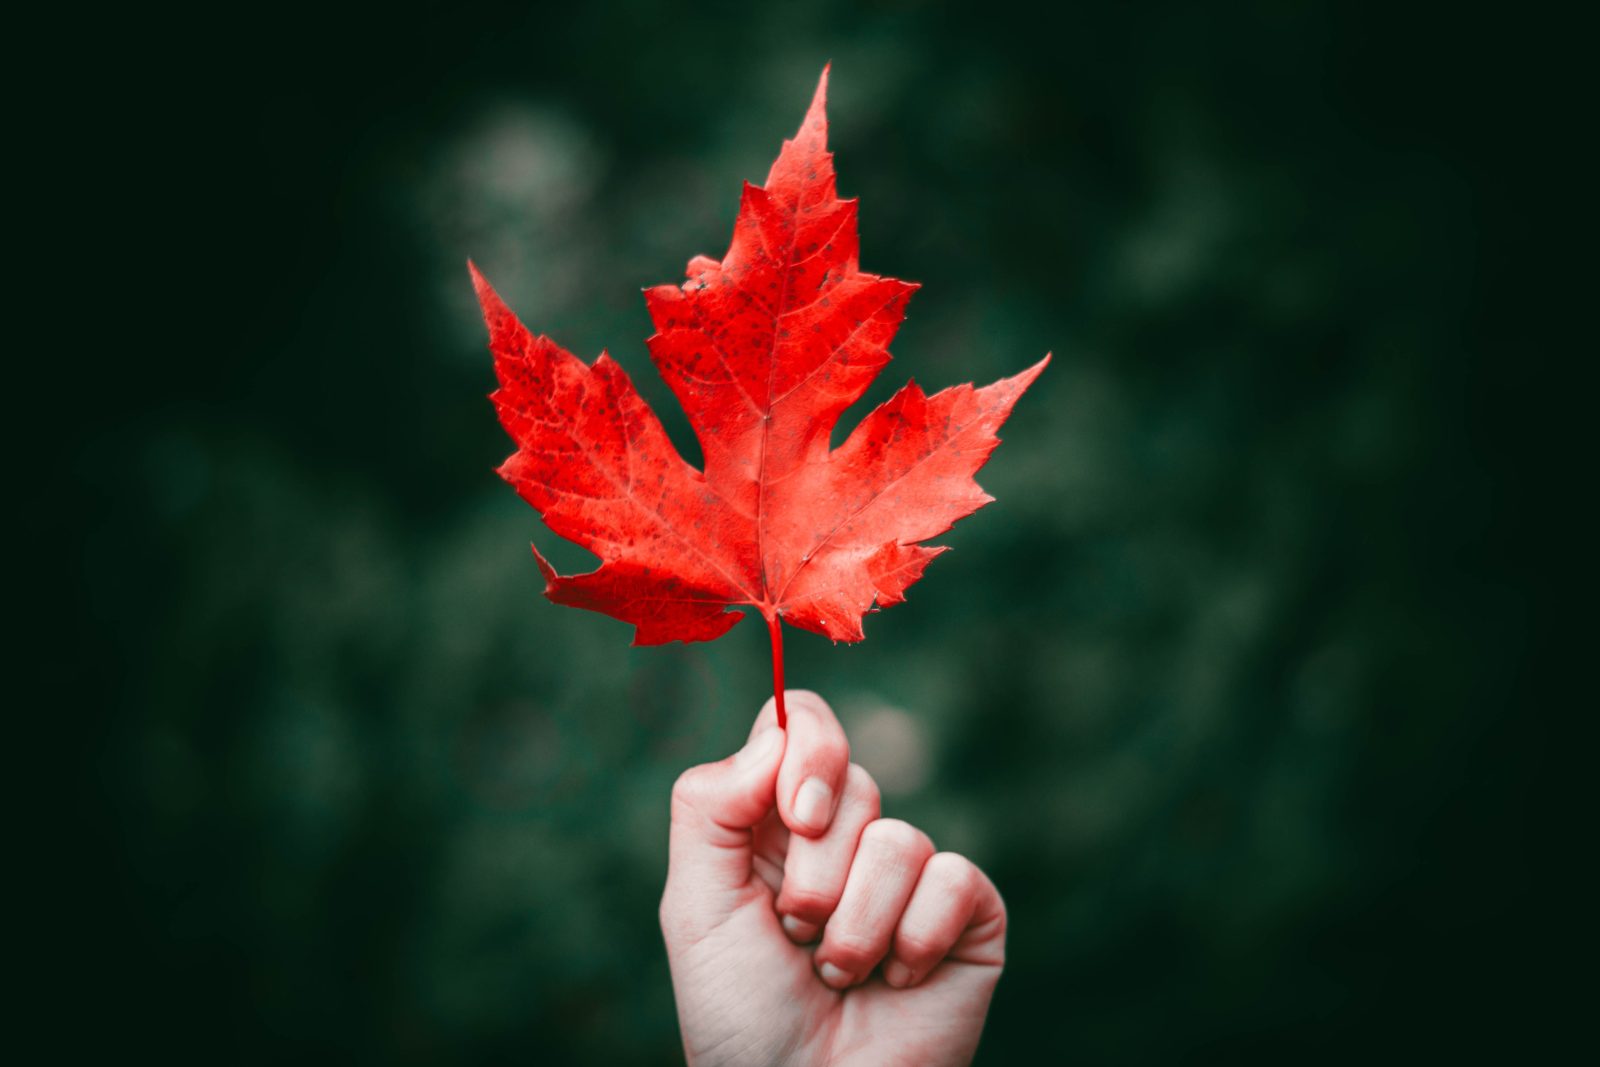 Someone holding up a red leaf